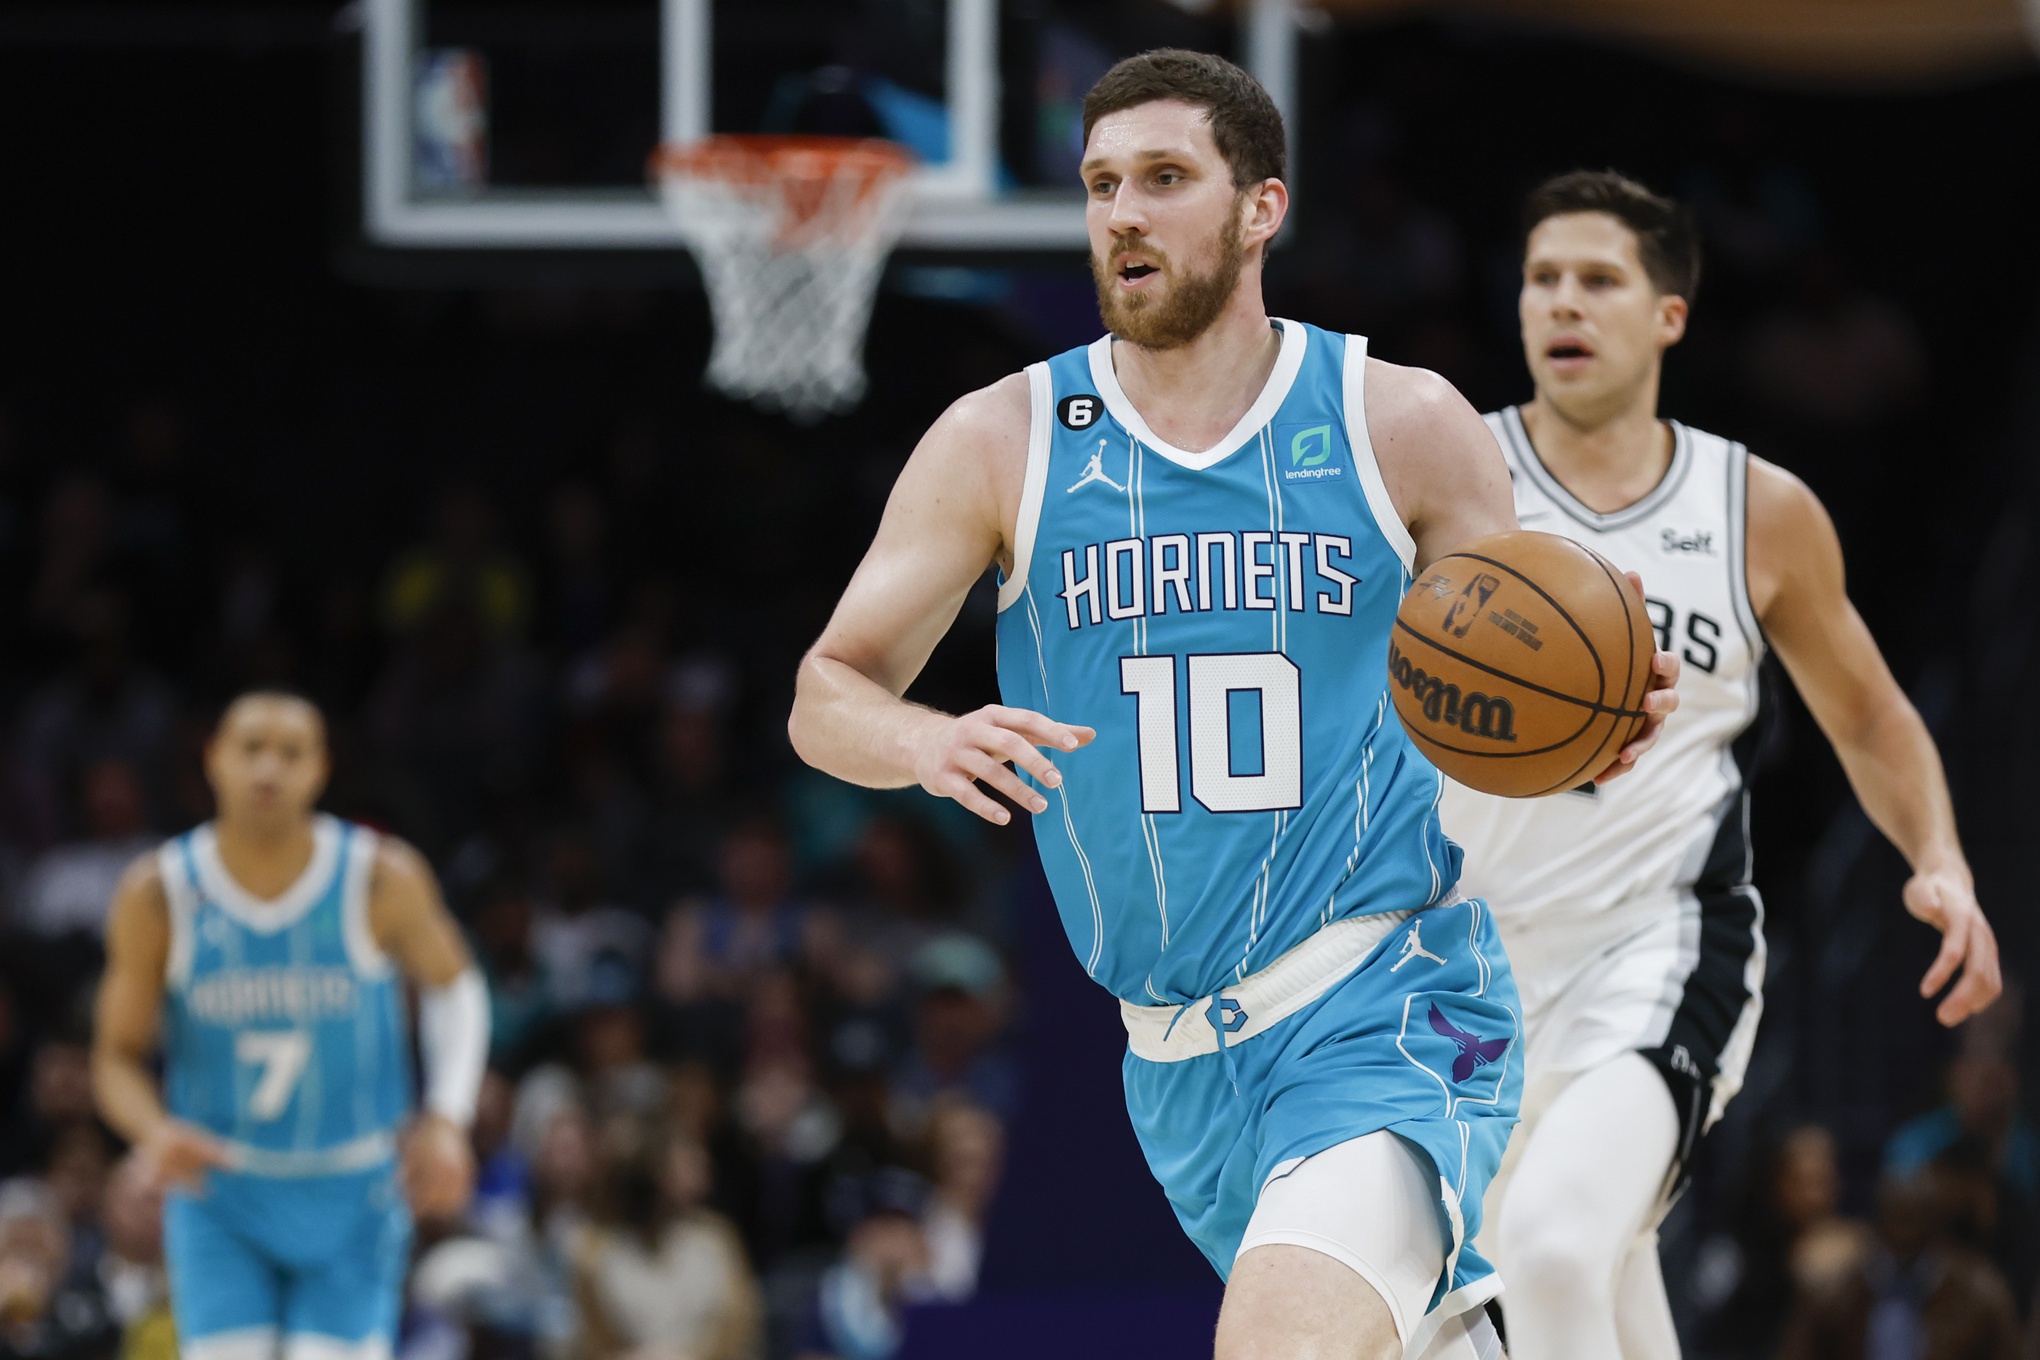 Feb 15, 2023; Charlotte, North Carolina, USA; Charlotte Hornets guard Svi Mykhailiuk (10) pushes the ball up court against the San Antonio Spurs during the second half at Spectrum Center. The Charlotte Hornets won 120-110. Mandatory Credit: Nell Redmond-USA TODAY Sports